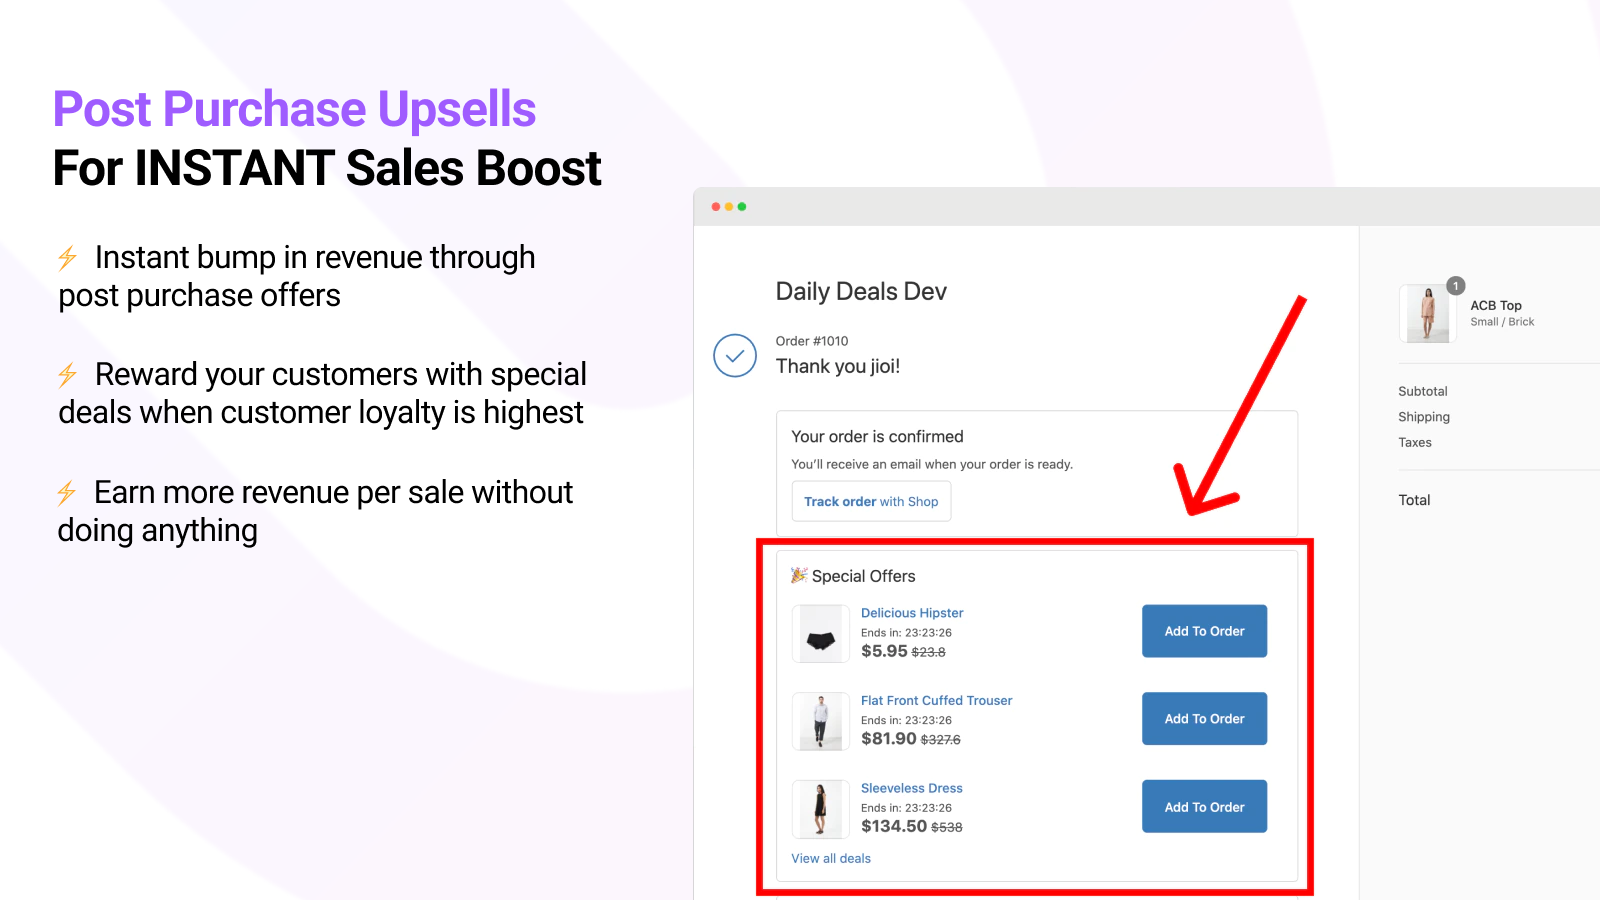 Post Purchase Upsells For INSTANT Sales Boost